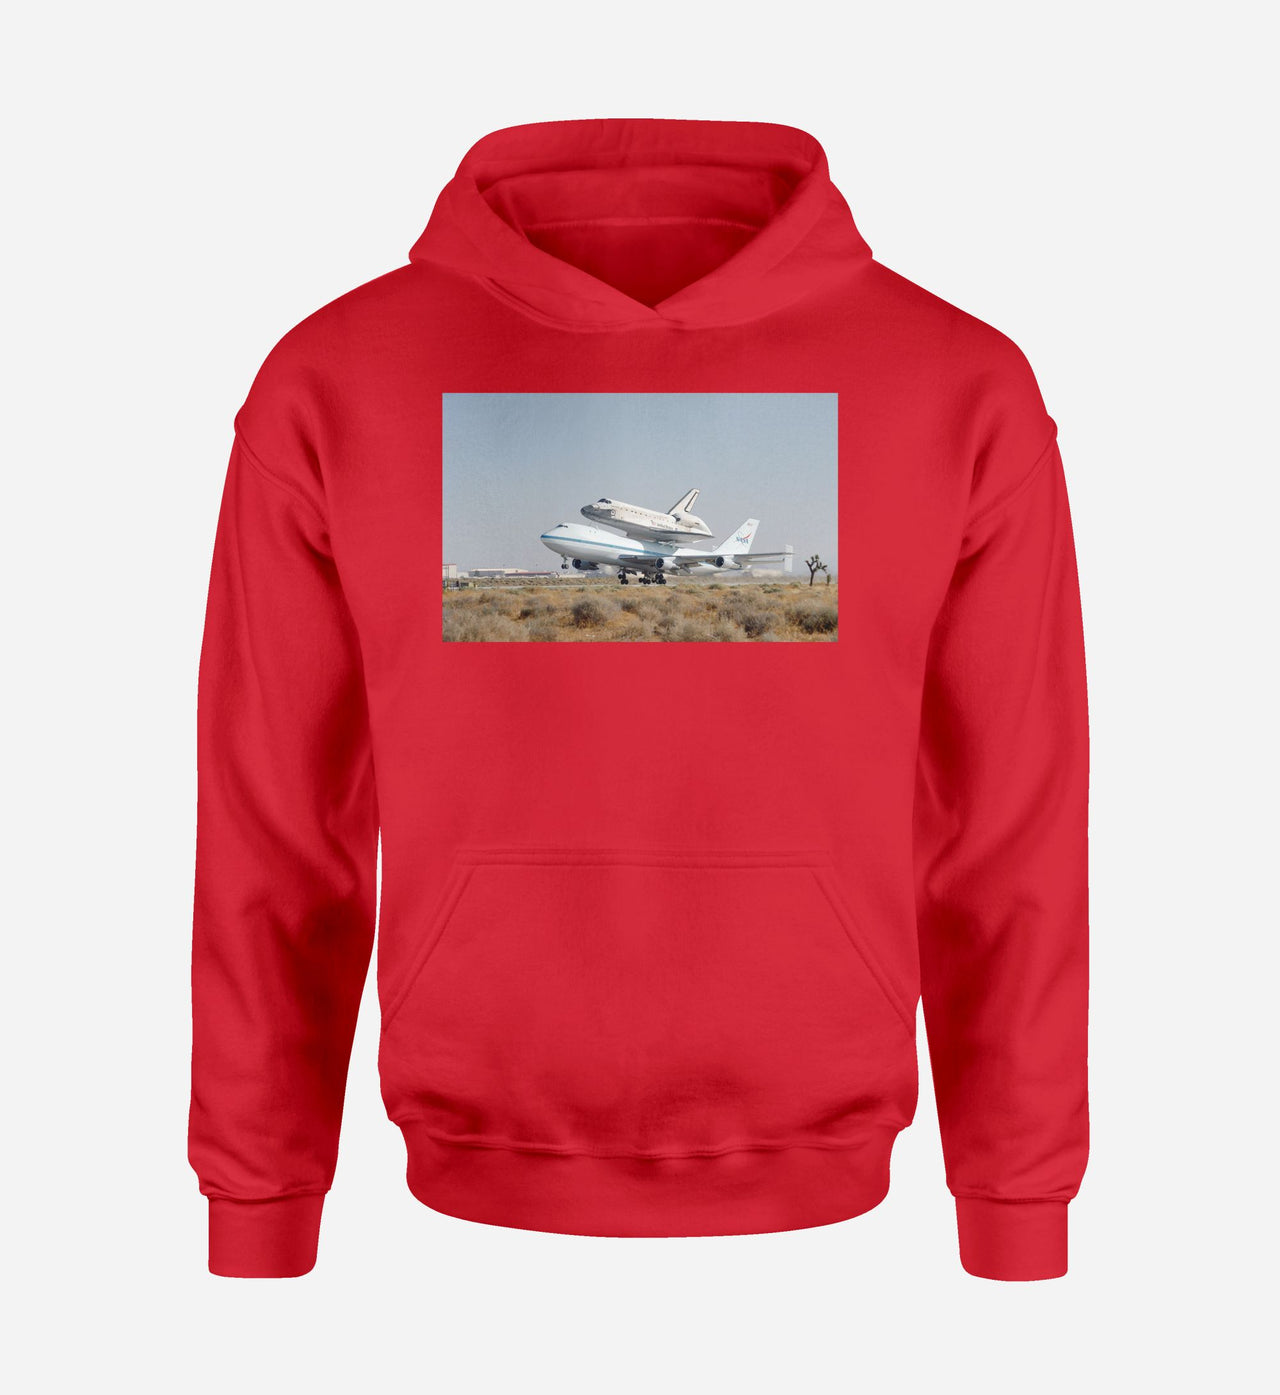 Boeing 747 Carrying Nasa's Space Shuttle Designed Hoodies